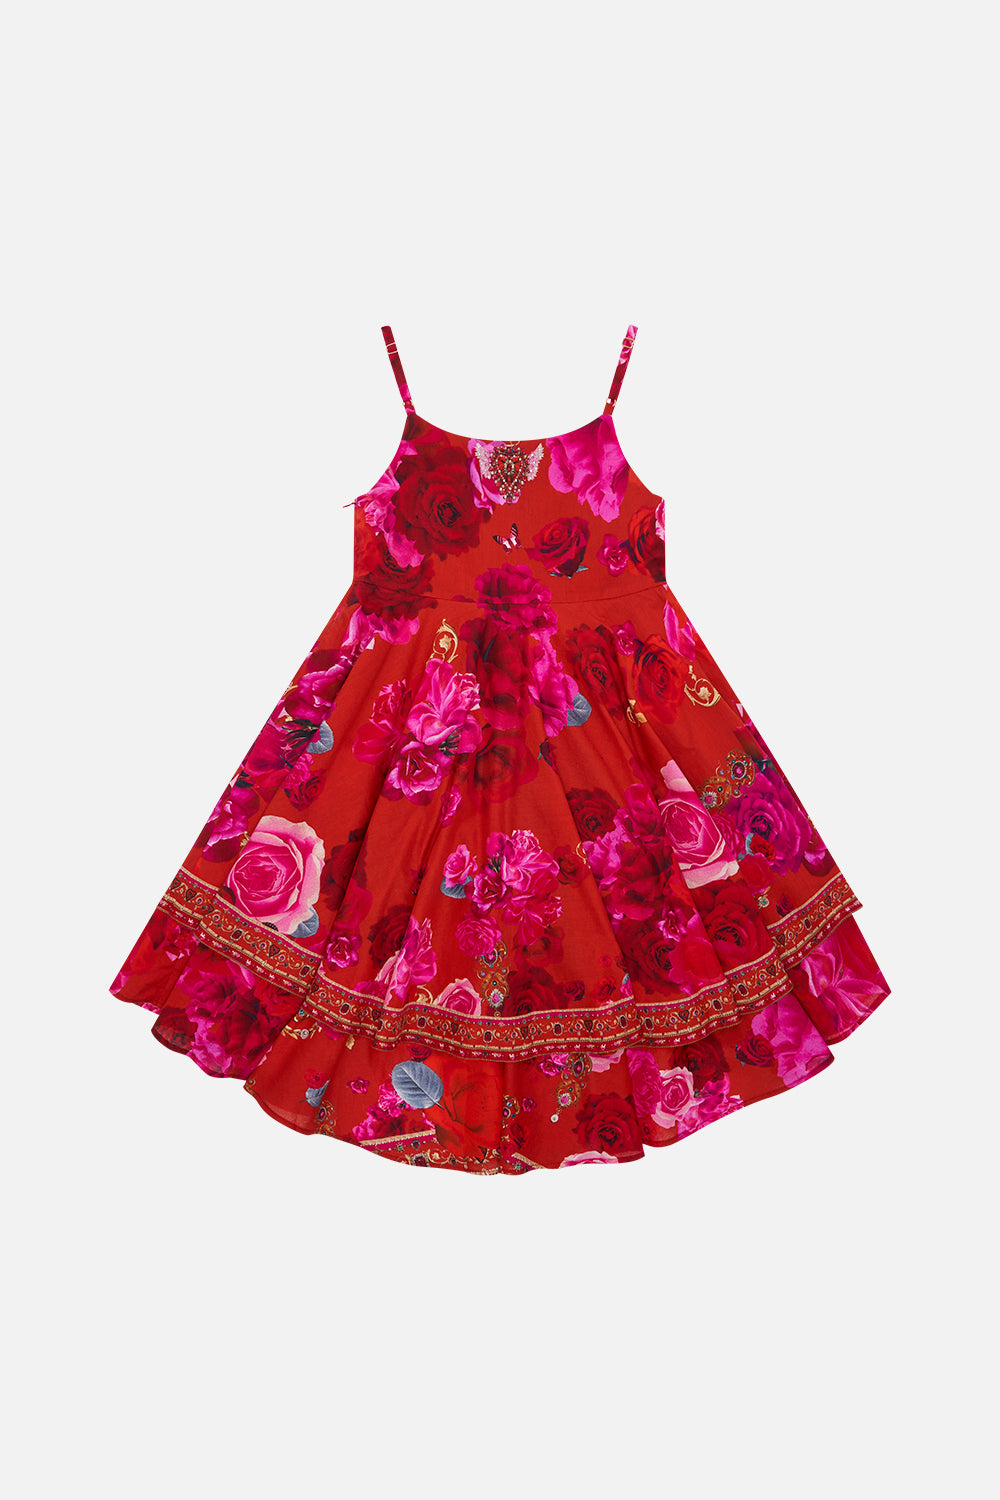 Product view of Milla By CAMILLA kids floral dress in An Italian Rosa print